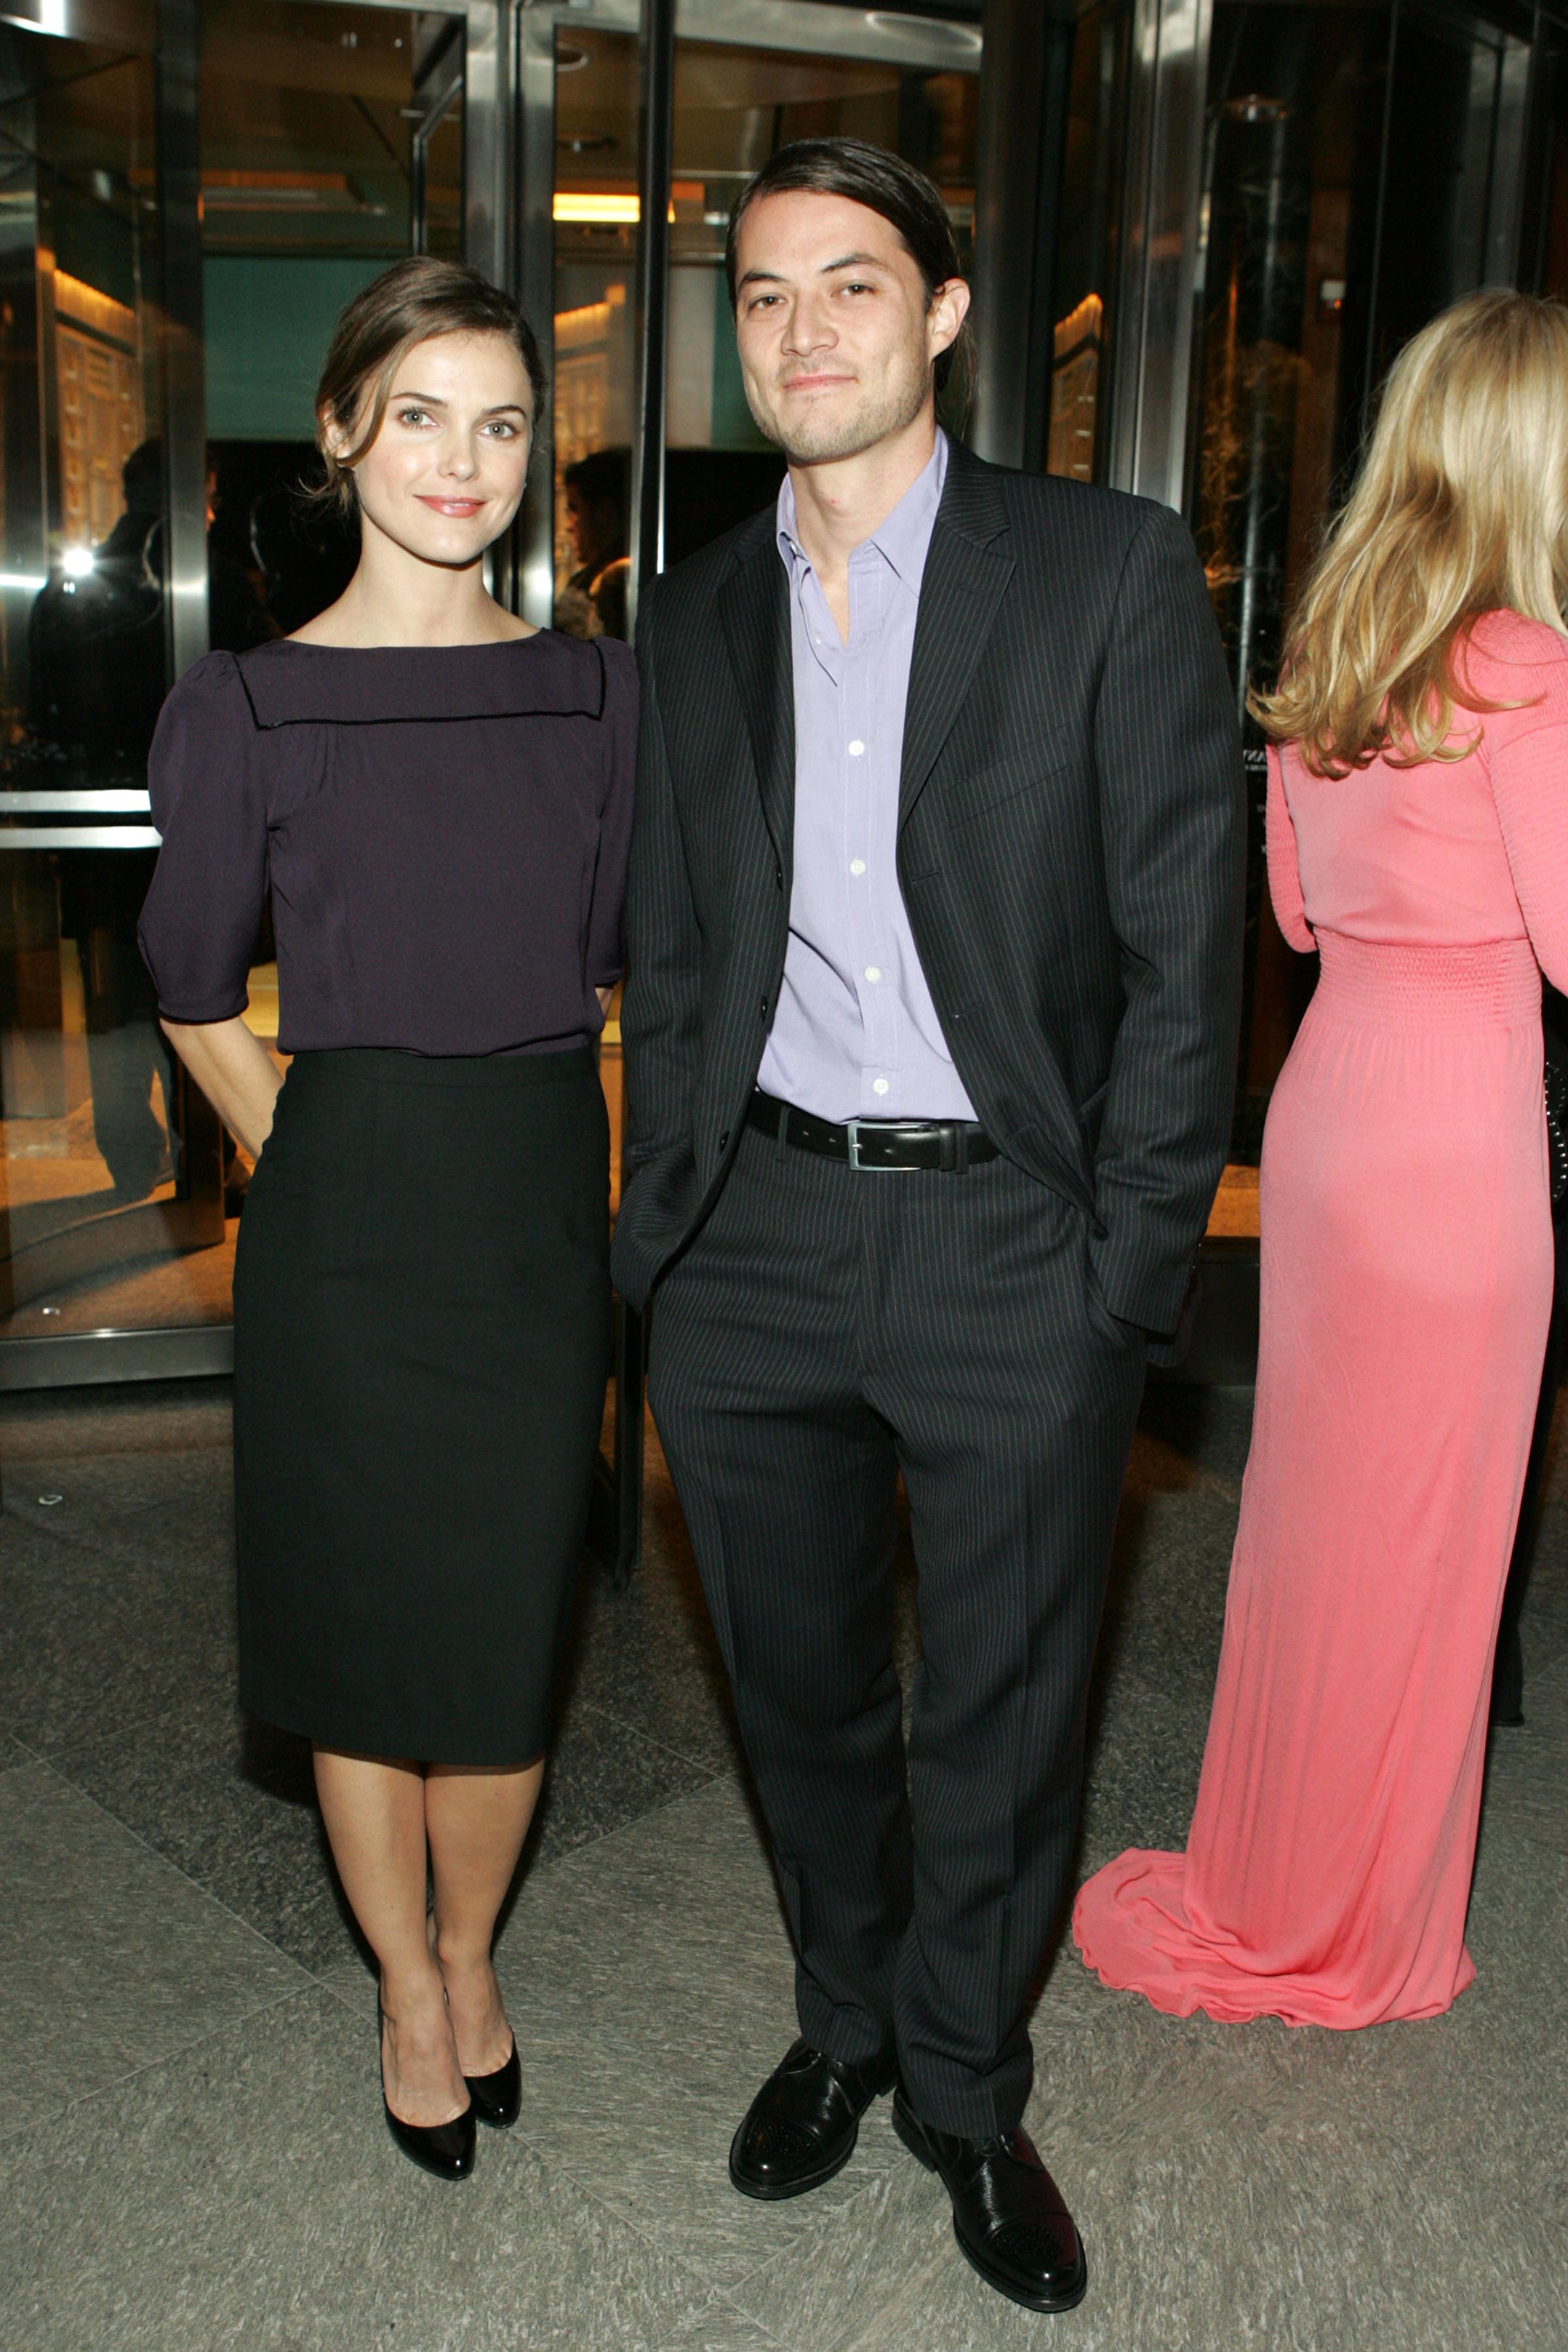 Keri Russell and Shane Deary attend Tiffany & Co. Host the Launch of the 2007 Blue Book Collection at Tiffany & Co. on October 23, 2006, in New York City. | Source: Getty Images